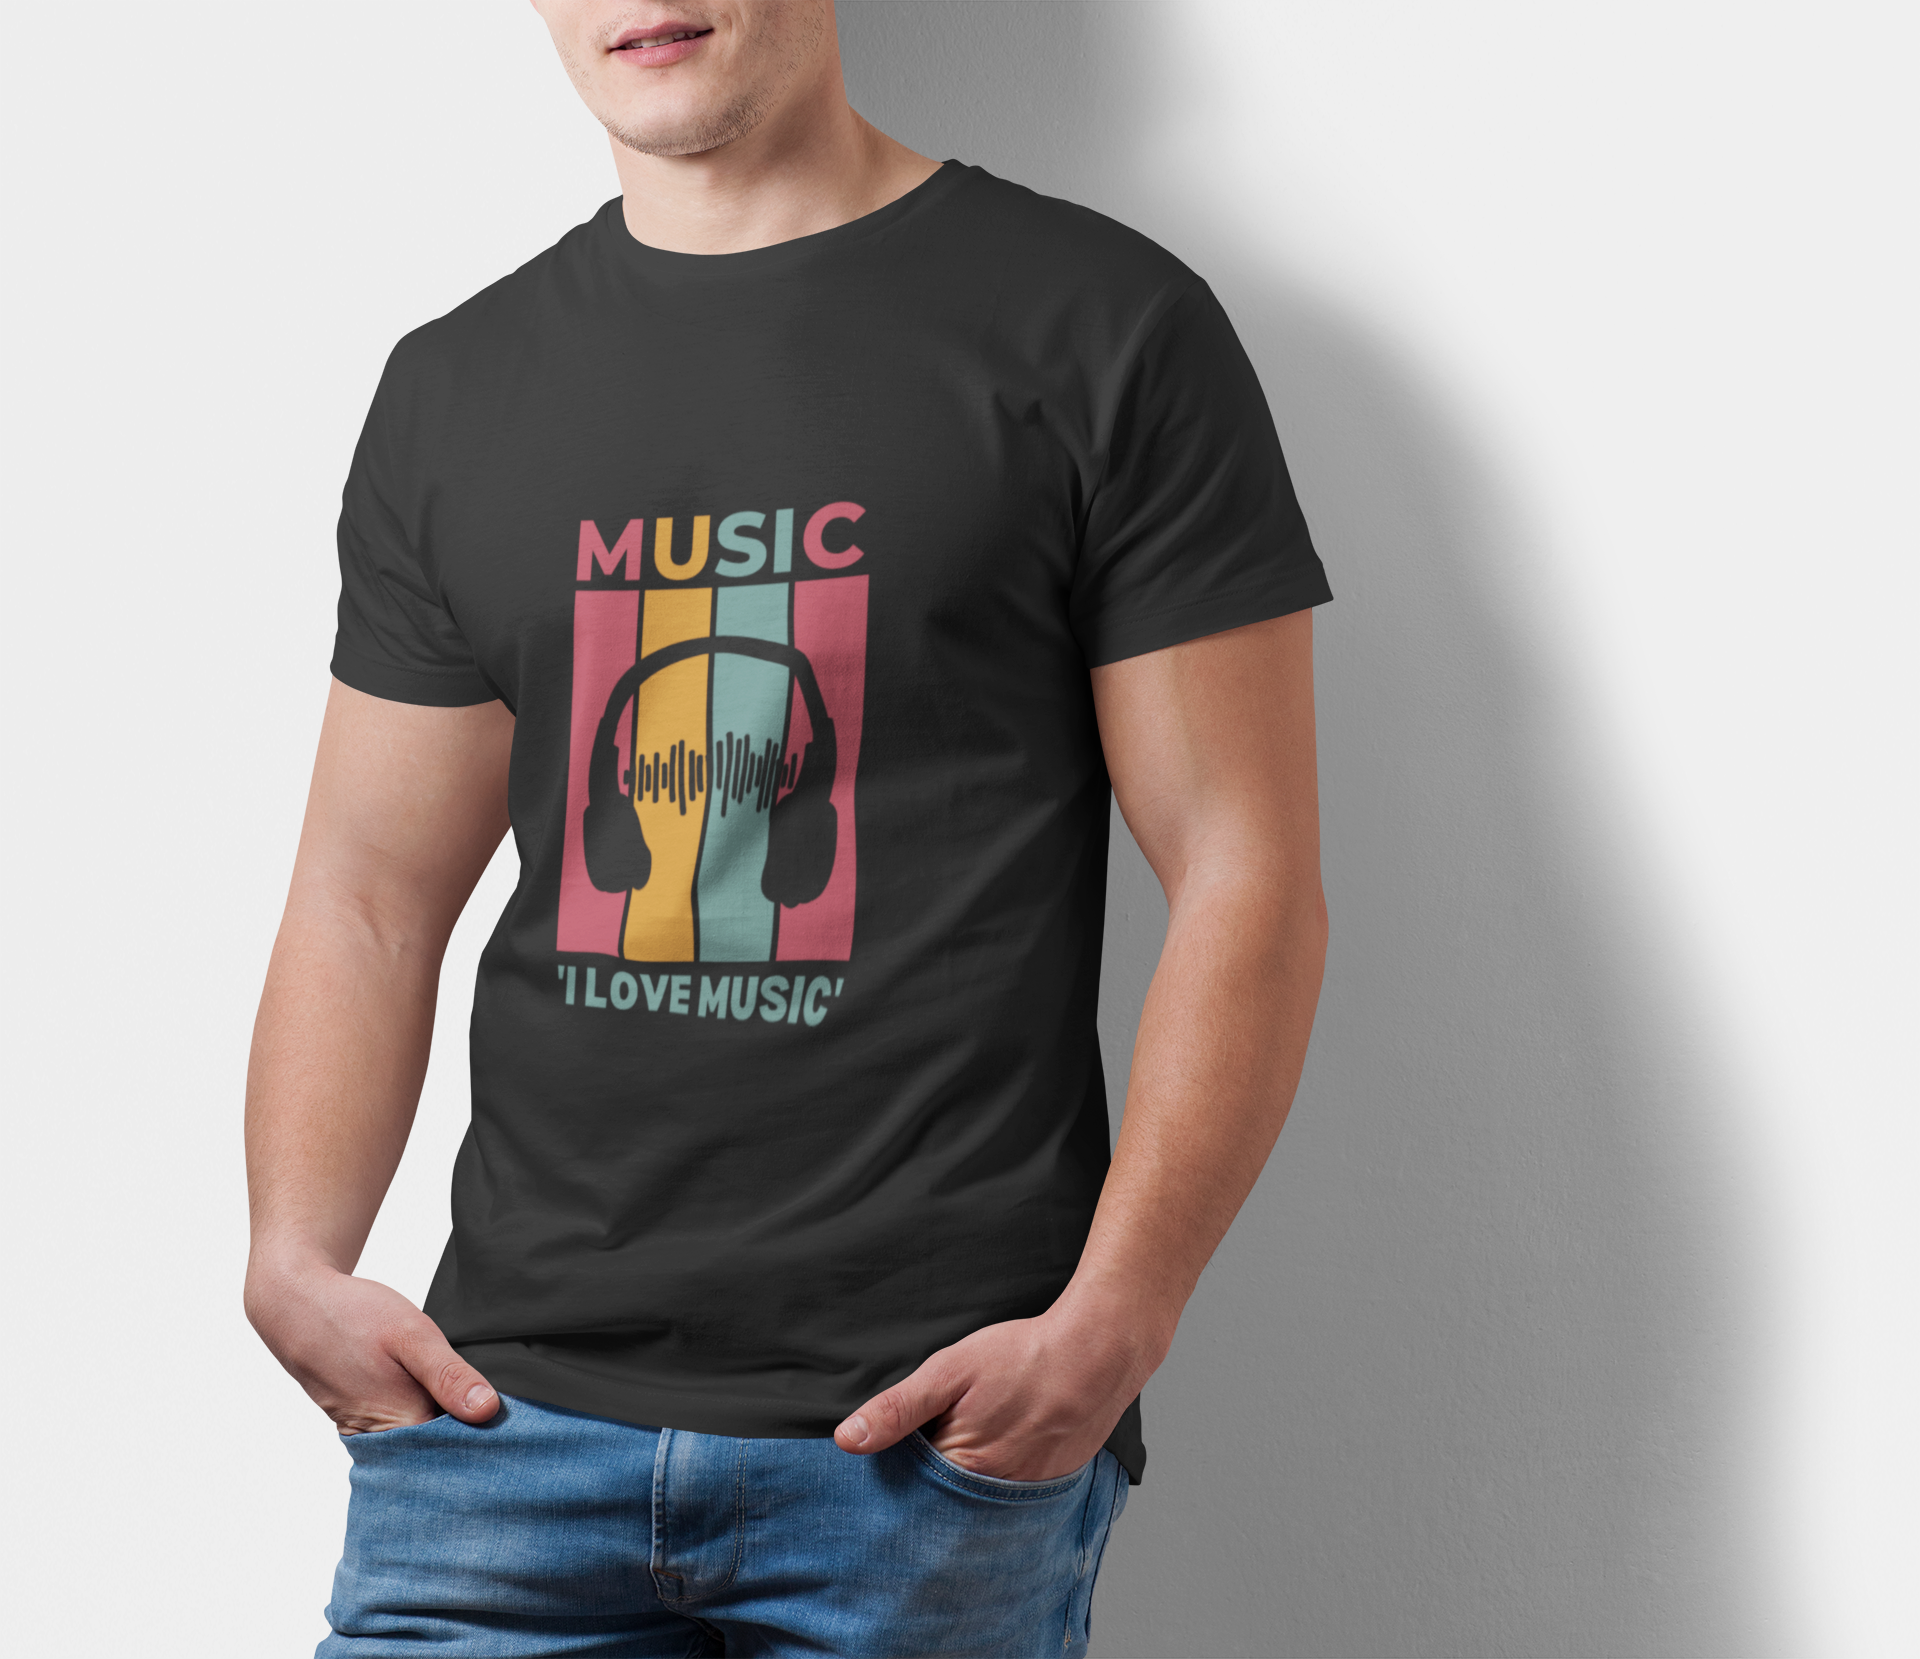 Seks øjenbryn Ithaca DECLARE YOUR PASSION FOR MUSIC WITH OUR 'I LOVE MUSIC' T-SHIRT! – HobbyTees